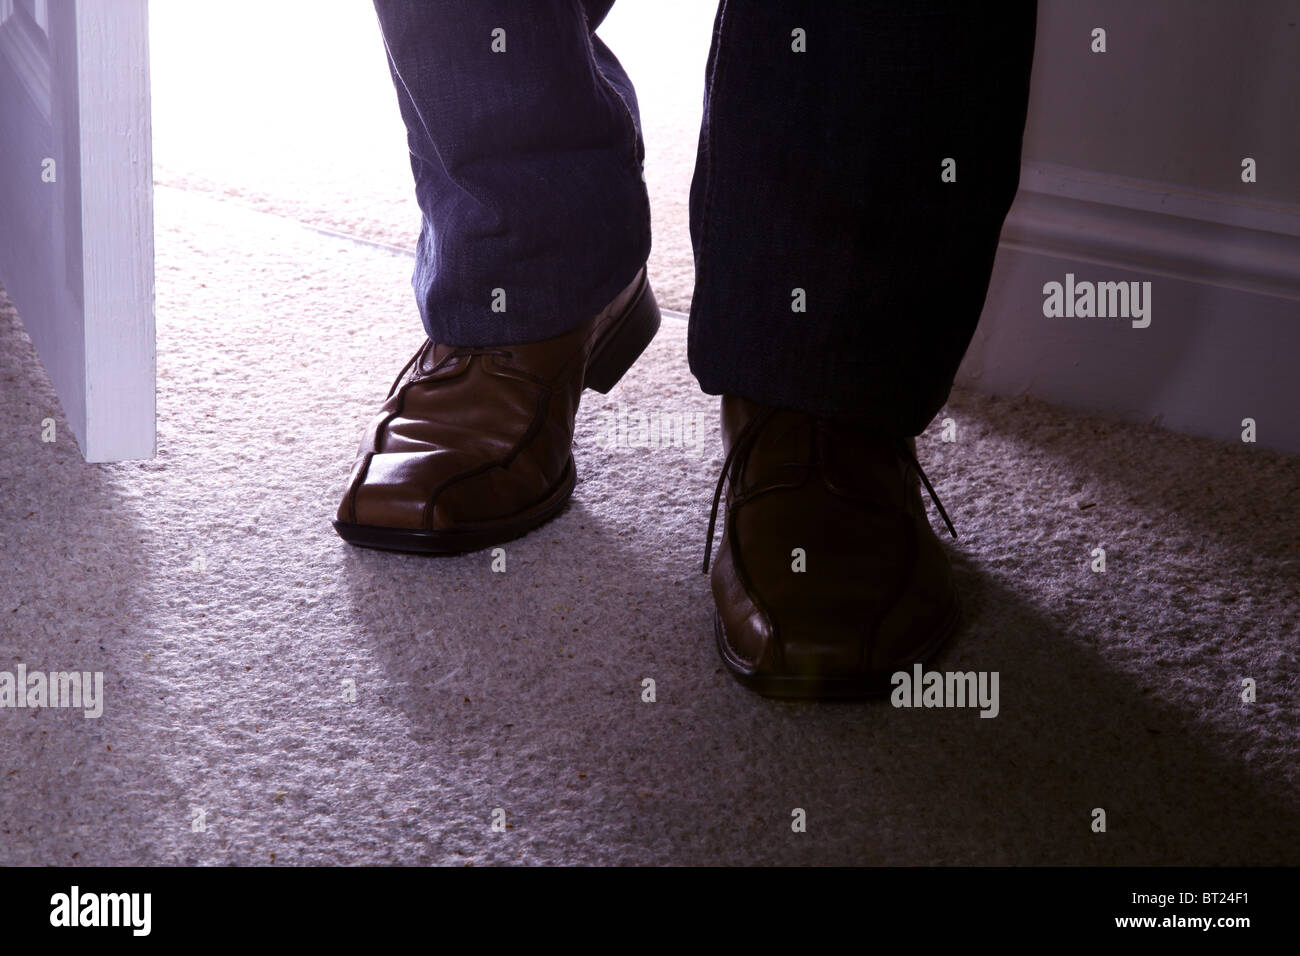 Brown man's shoes walking into a room Stock Photo